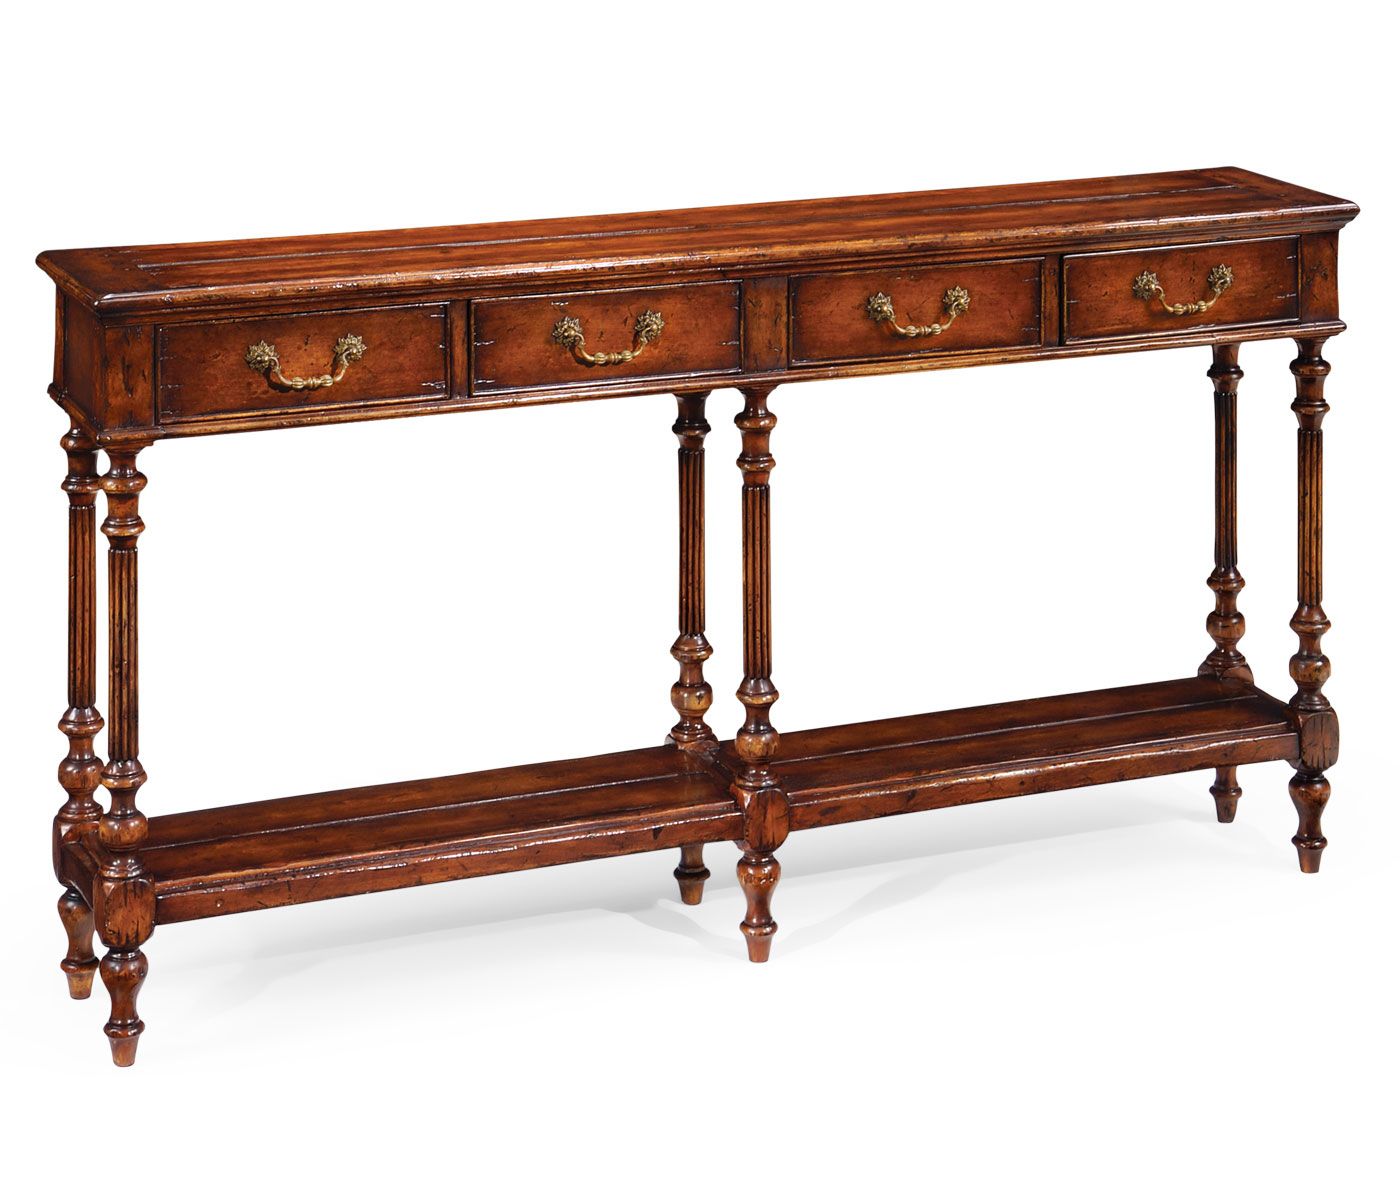 Narrow Walnut Console Antique Finish Regarding Antique Console Tables (View 7 of 20)